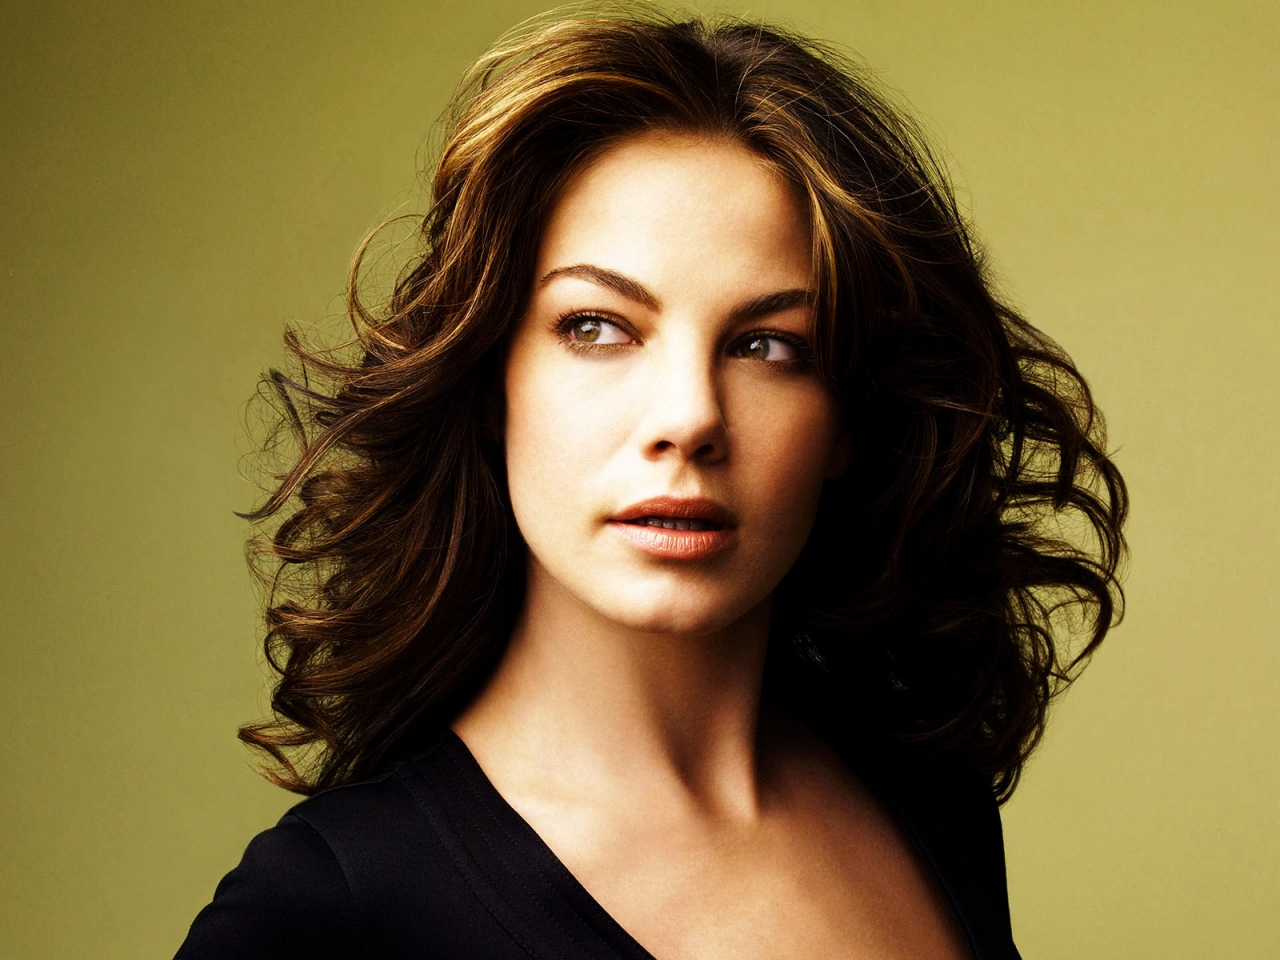 Michelle Monaghan for 1280 x 960 resolution